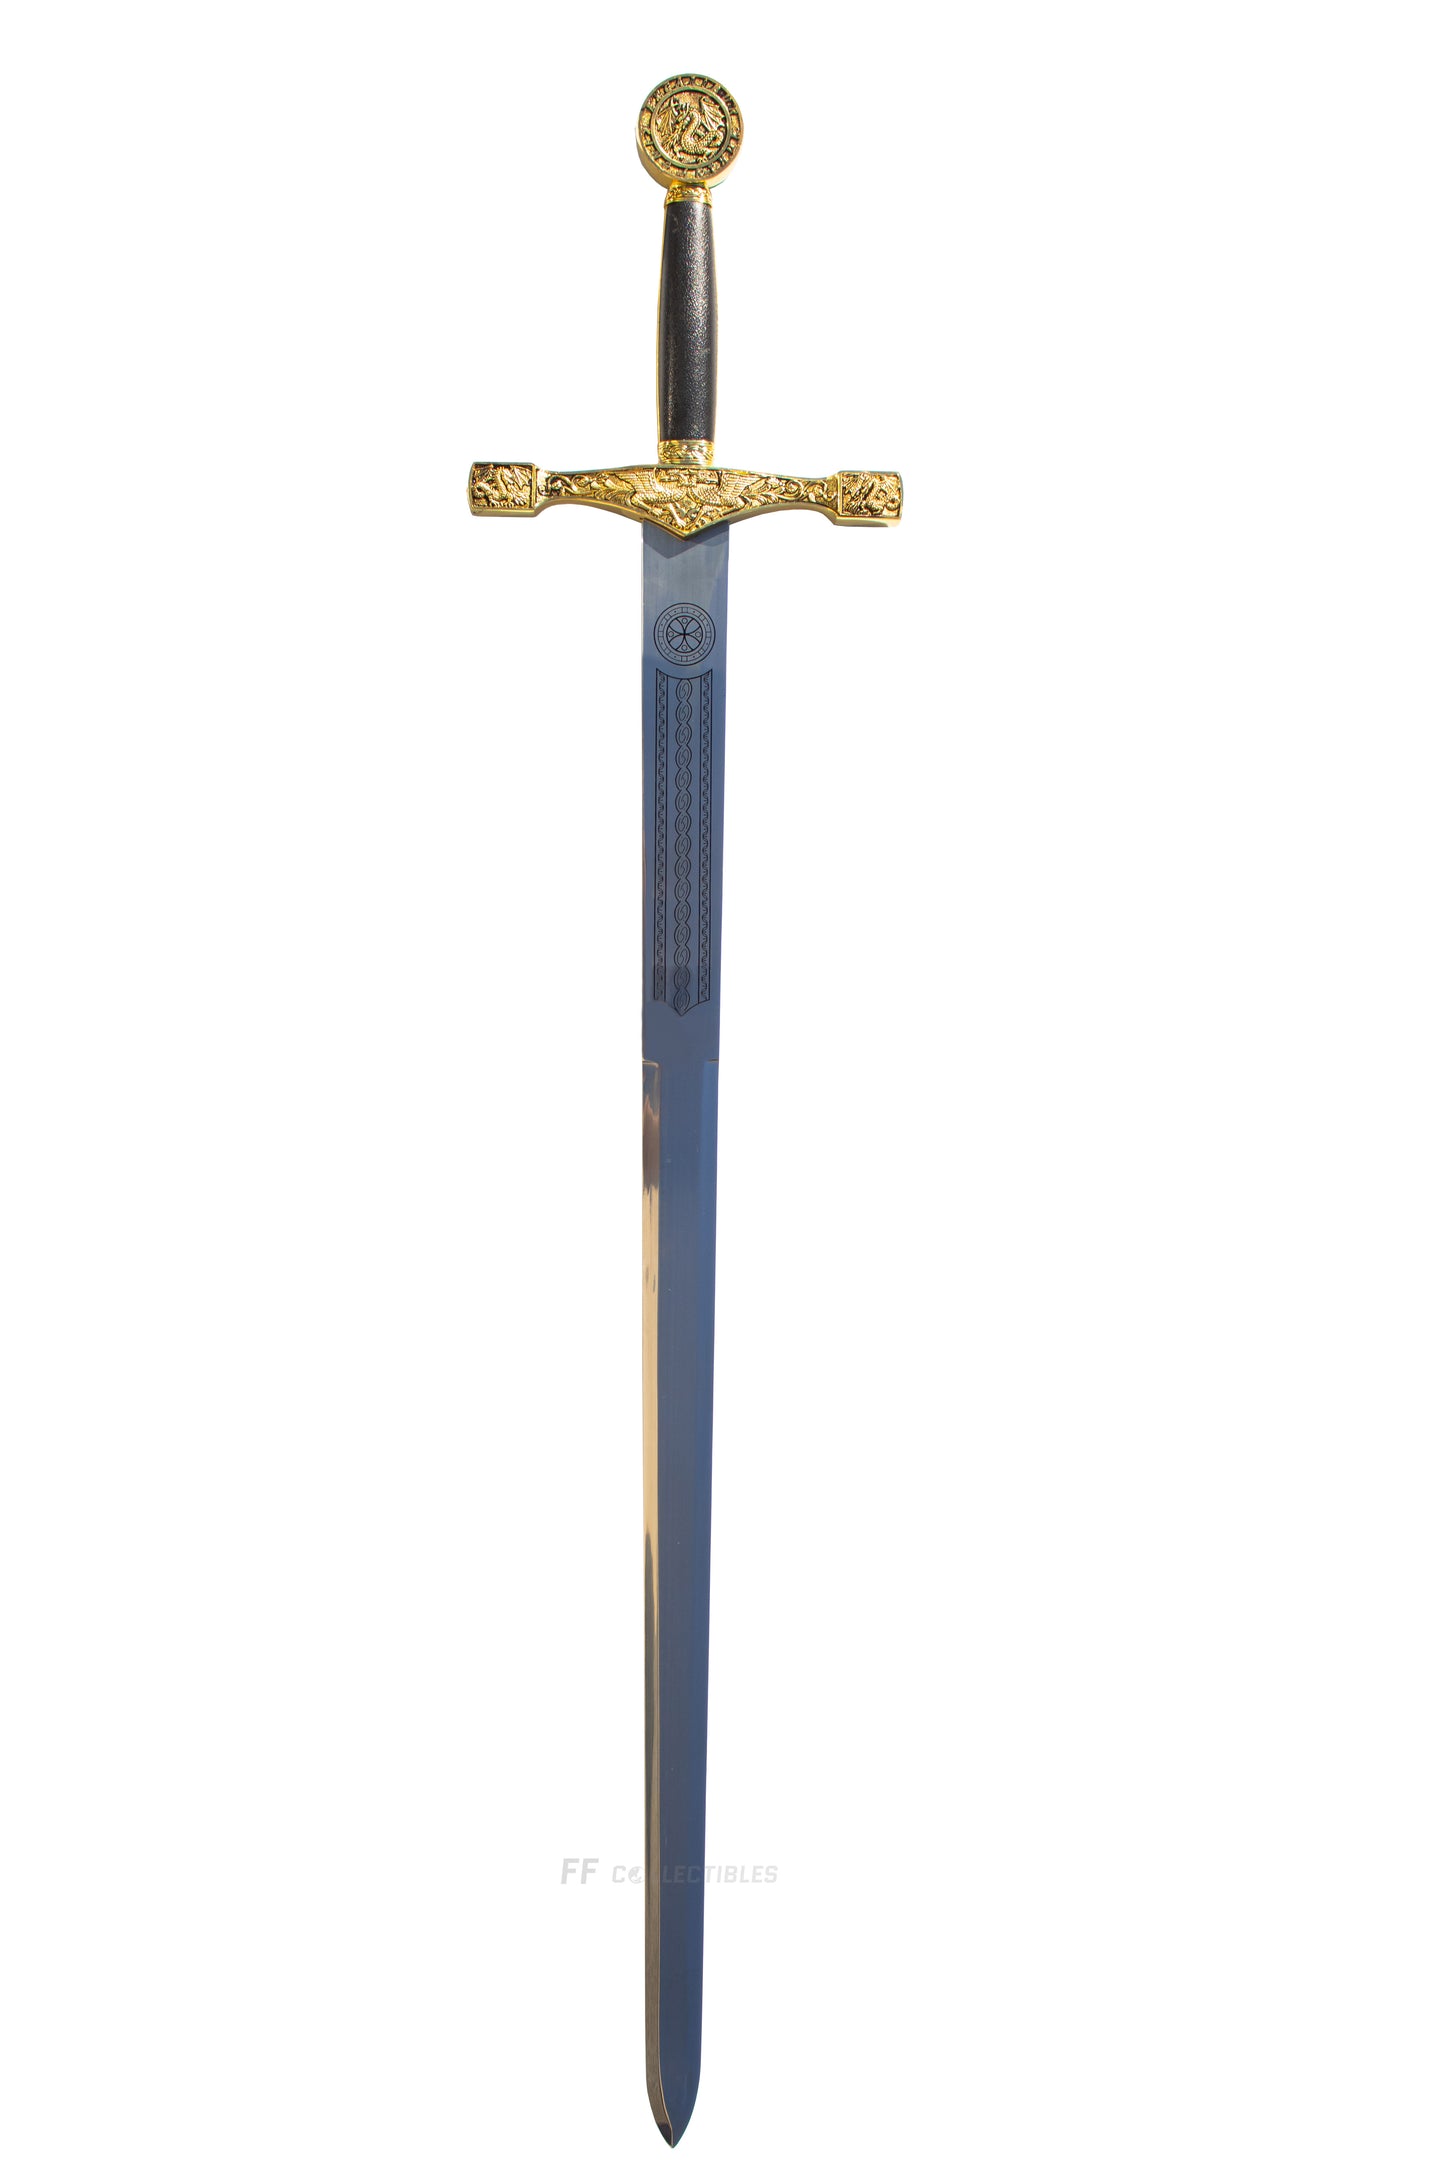 SWORD OF KING ARTHUR - EXCALIBUR (with FREE wall plaque, LIMITED GOLD EDITION)